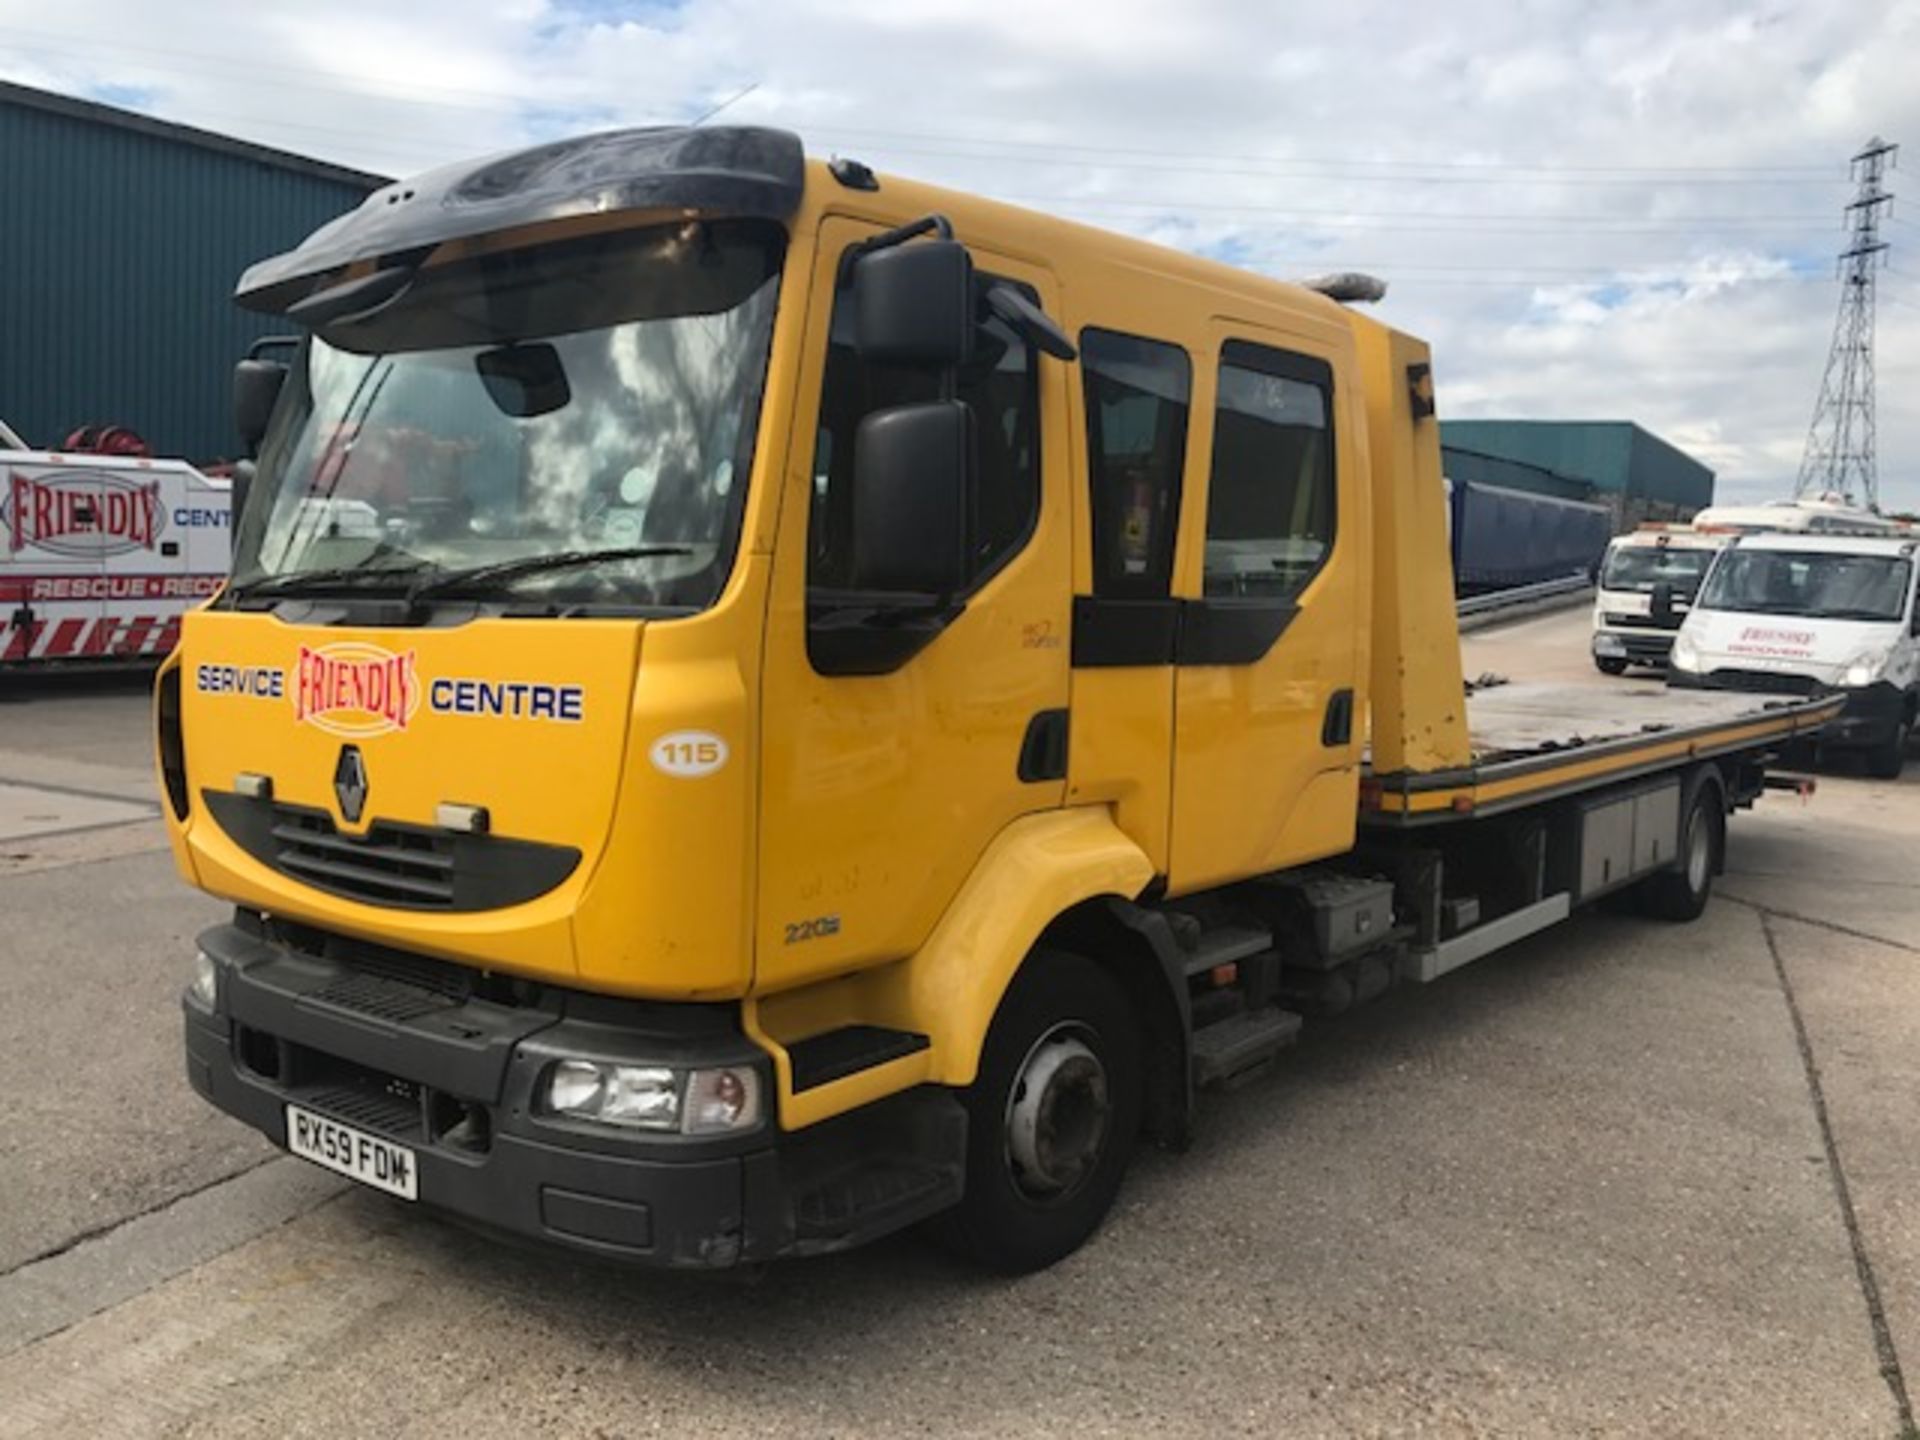 2010 Renault Midlum 220DXi 12t crew cab breakdown recovery vehicle with spec. lift, J&J conversion